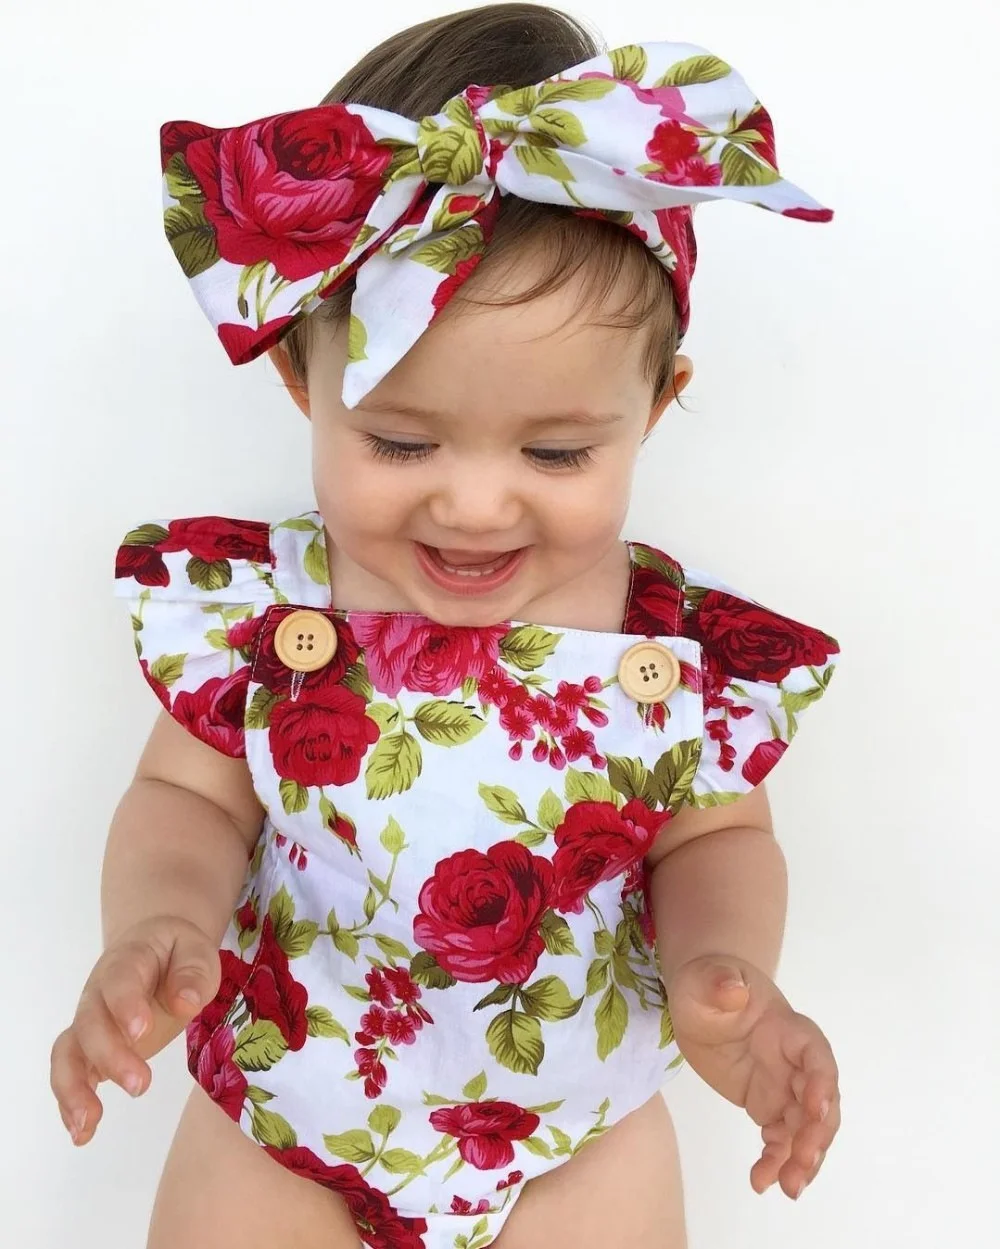 

Newborn girl baby Cute Floral Romper 2pcs Baby Girls Clothes Jumpsuit RomperHeadband 0-24M Age Ifant Toddler Newborn Outfits Set